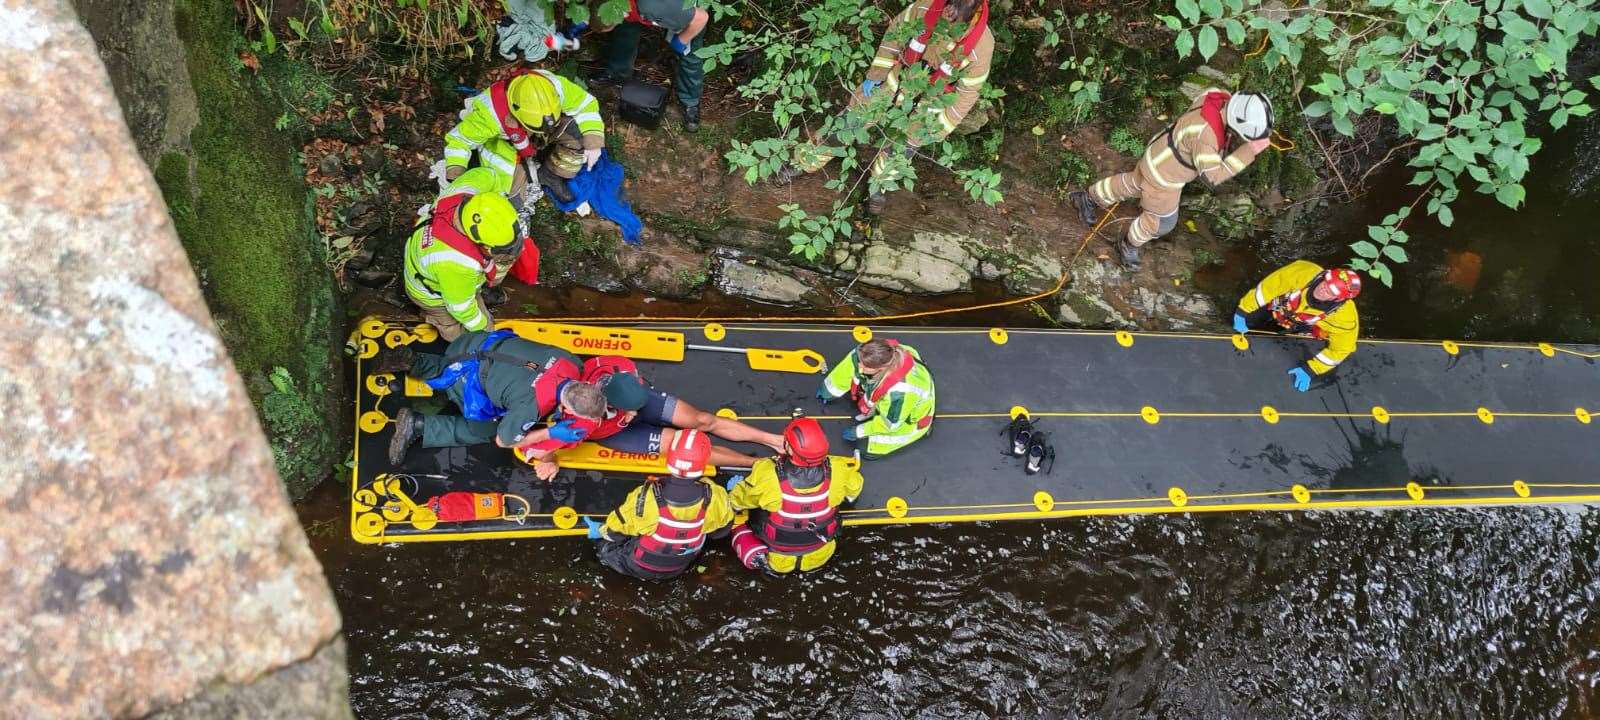 Emergency services rescuers used a large raft to get Duncan Brown to safety. Picture: Jasperimage.